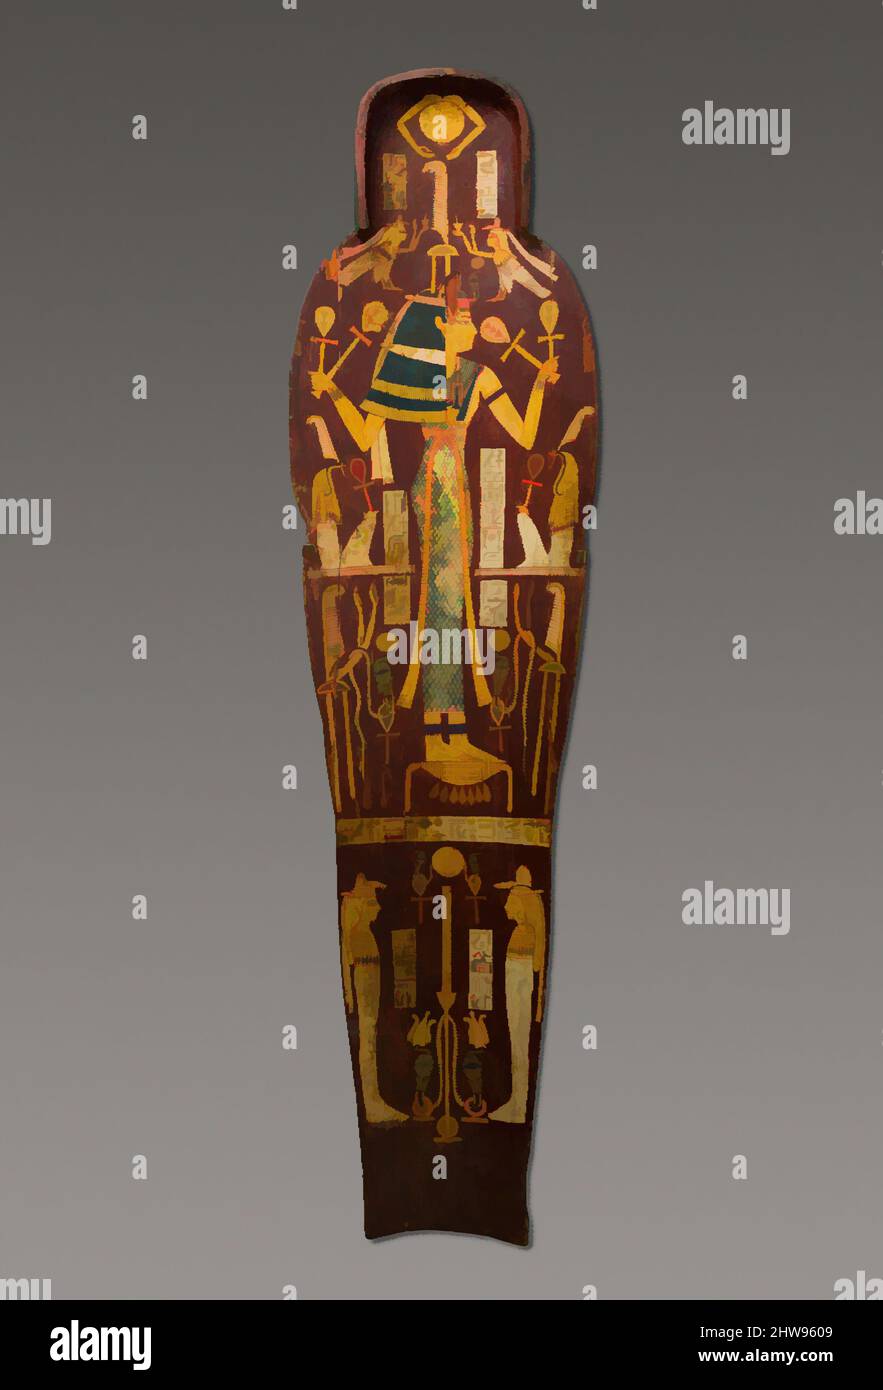 Art inspired by Mummy Board of Henettawy (C), Probable Sister-Wife of High Priest of Amun Smendes, Third Intermediate Period, Dynasty 21, ca. 990–970 B.C., From Egypt, Upper Egypt, Thebes, Deir el-Bahri, Tomb, Chamber B, Burial of Henettawy C (4), 1923–24, Wood, gesso, paint, l. 171 cm, Classic works modernized by Artotop with a splash of modernity. Shapes, color and value, eye-catching visual impact on art. Emotions through freedom of artworks in a contemporary way. A timeless message pursuing a wildly creative new direction. Artists turning to the digital medium and creating the Artotop NFT Stock Photo